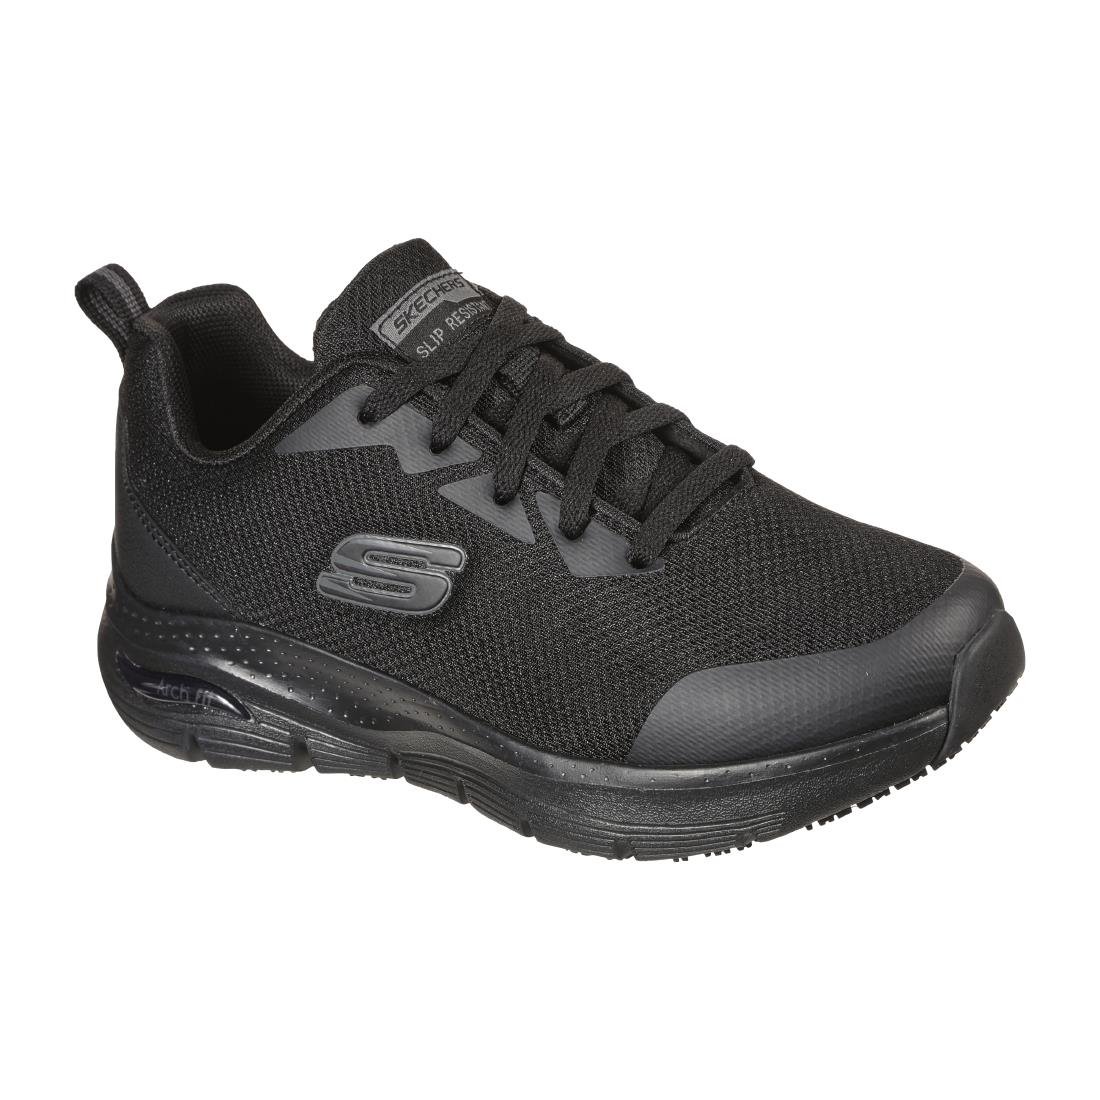 BB671-41 Skechers Womens Slip Resistant Arch Fit Trainer Size 41 JD Catering Equipment Solutions Ltd